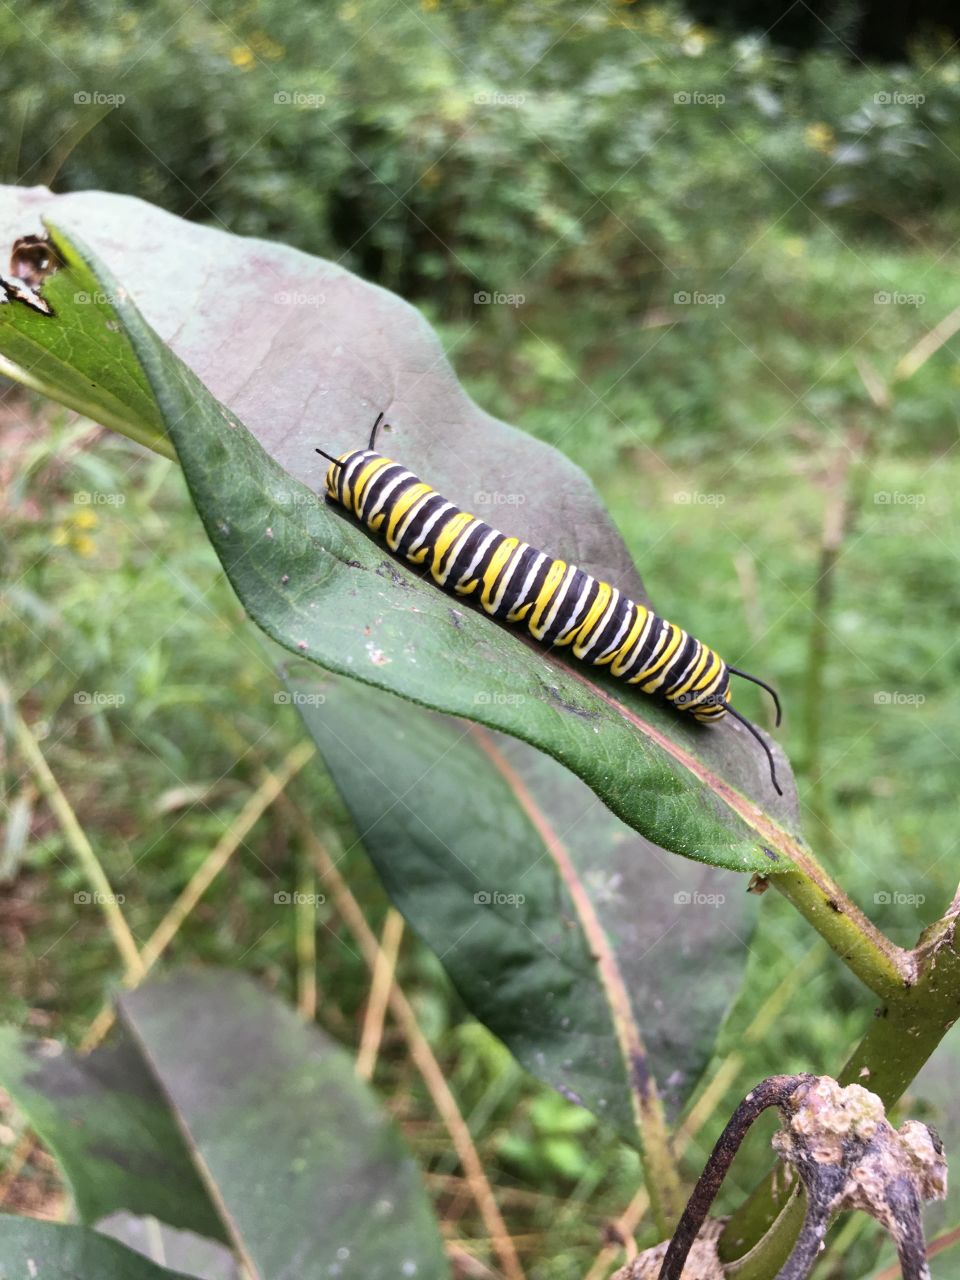 Colorful caterpillar on a leaf 